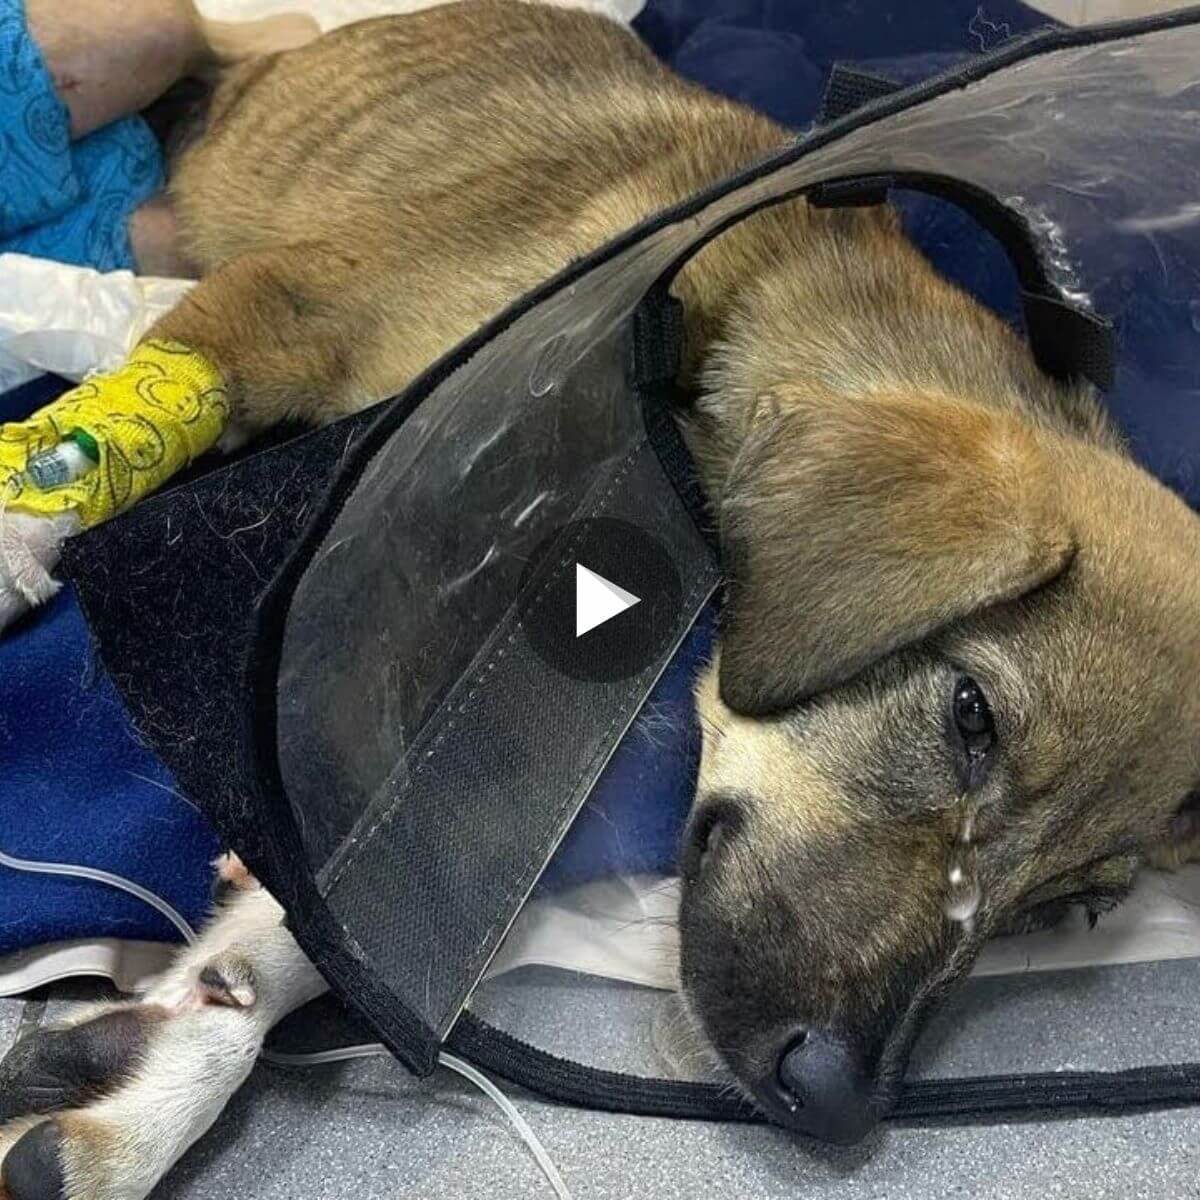 Molly, a small puppy, endured a broken hind leg after being hit by a car, demonstrating the importance of responsible pet ownership and road safety.